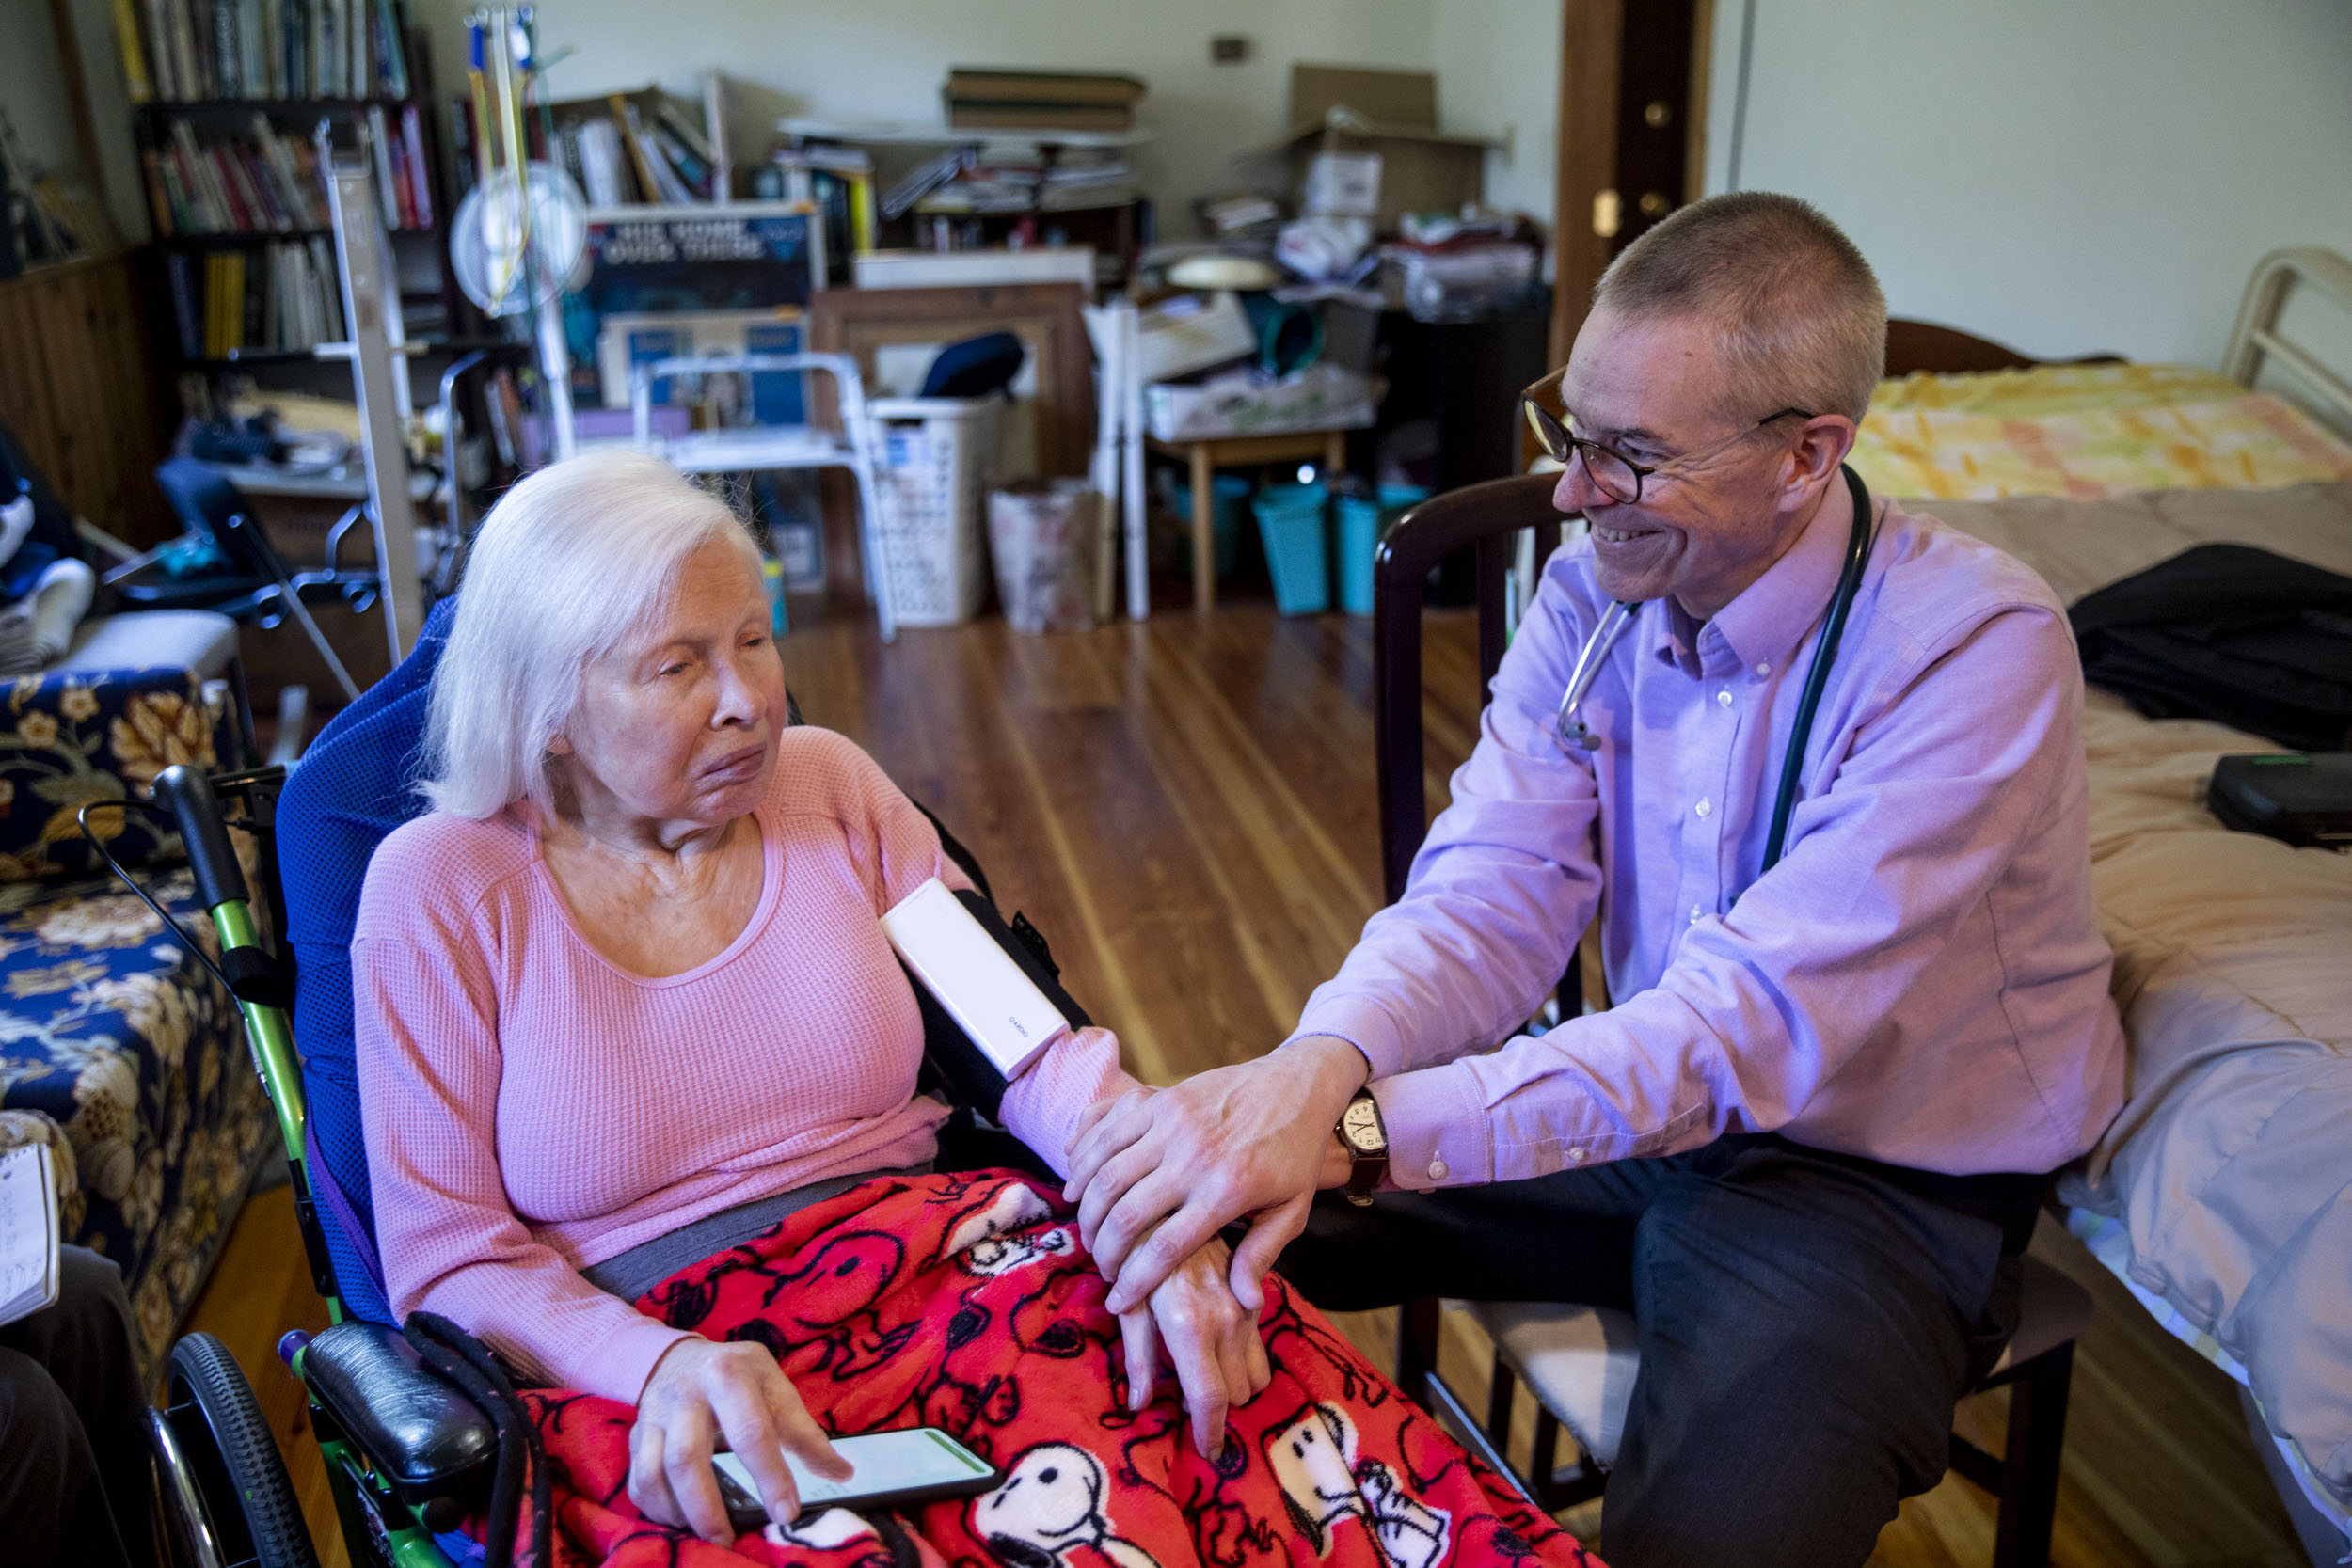 Dr. Peter Lehmann visits with Alzheimer's patient Maureen O'Tool, 81, in her Kingston home on March 19, 2019. (Photo by Dorothy Edwards/Crosscut)